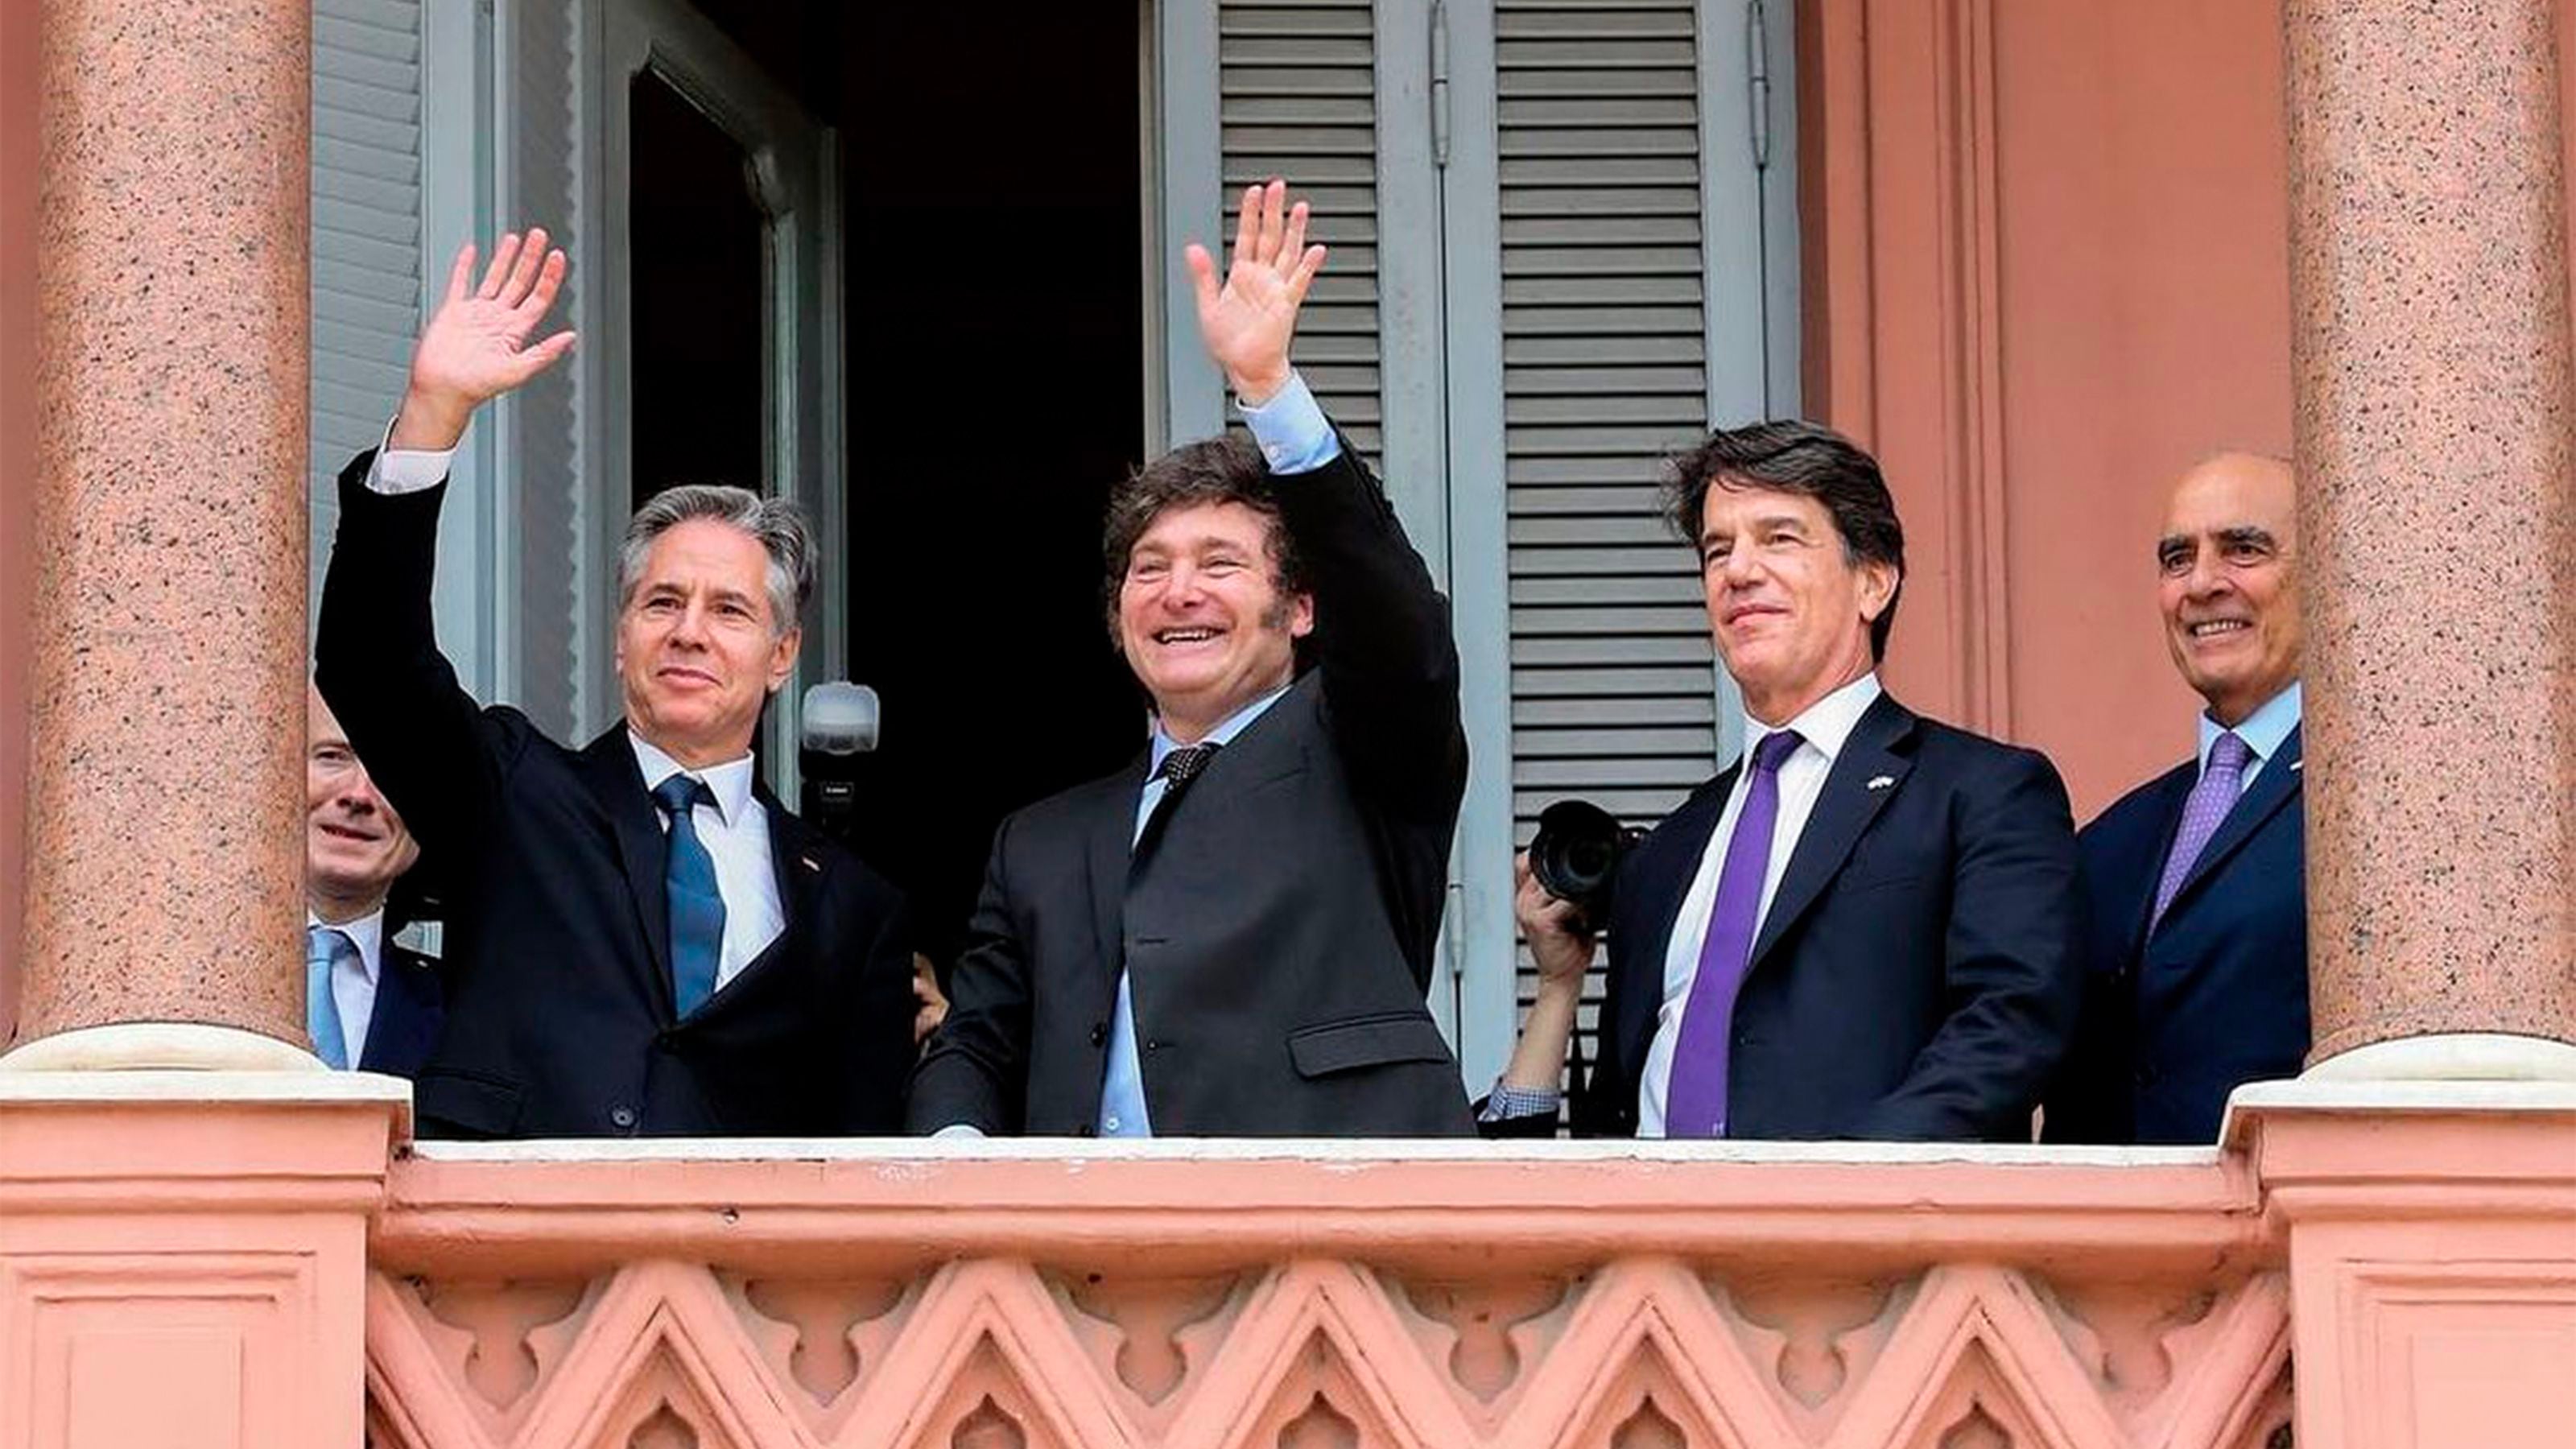 blinken, after his visit to milei: ‘argentina can count on us as they work to stabilise their economy’